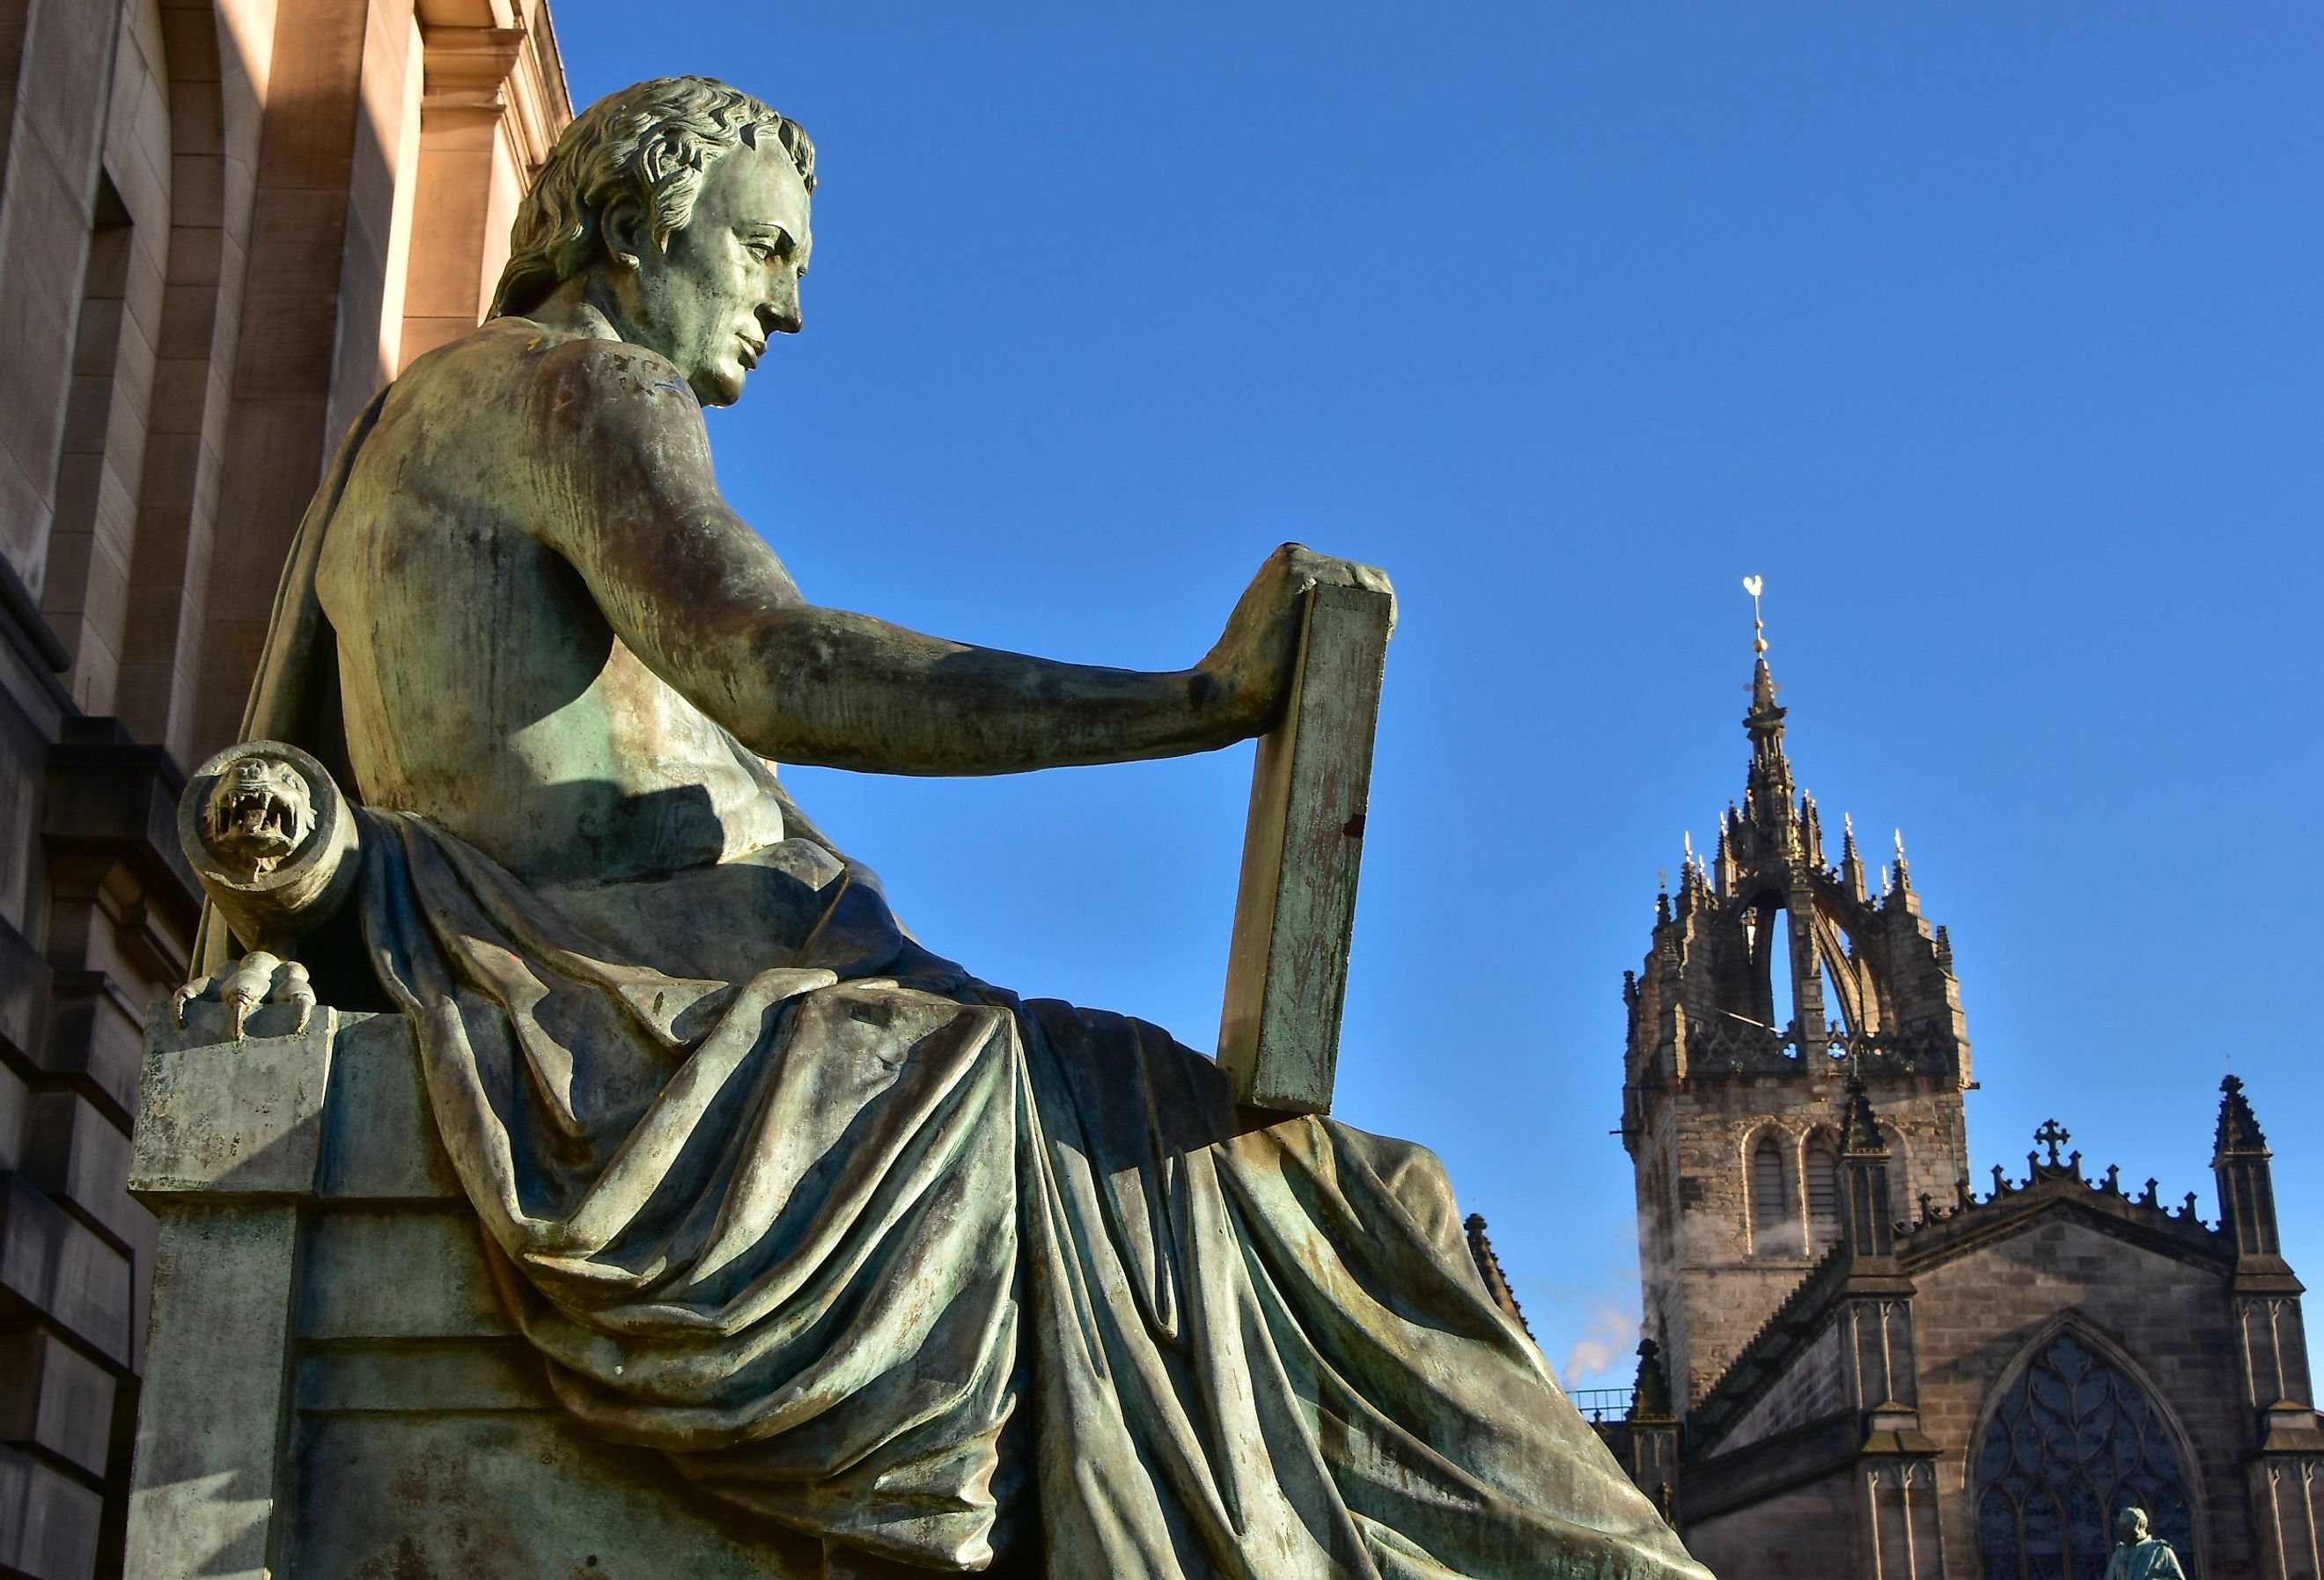 Statue of David Hume with St Giles' Cathedral in the background, Royal Mile, Edinburgh.